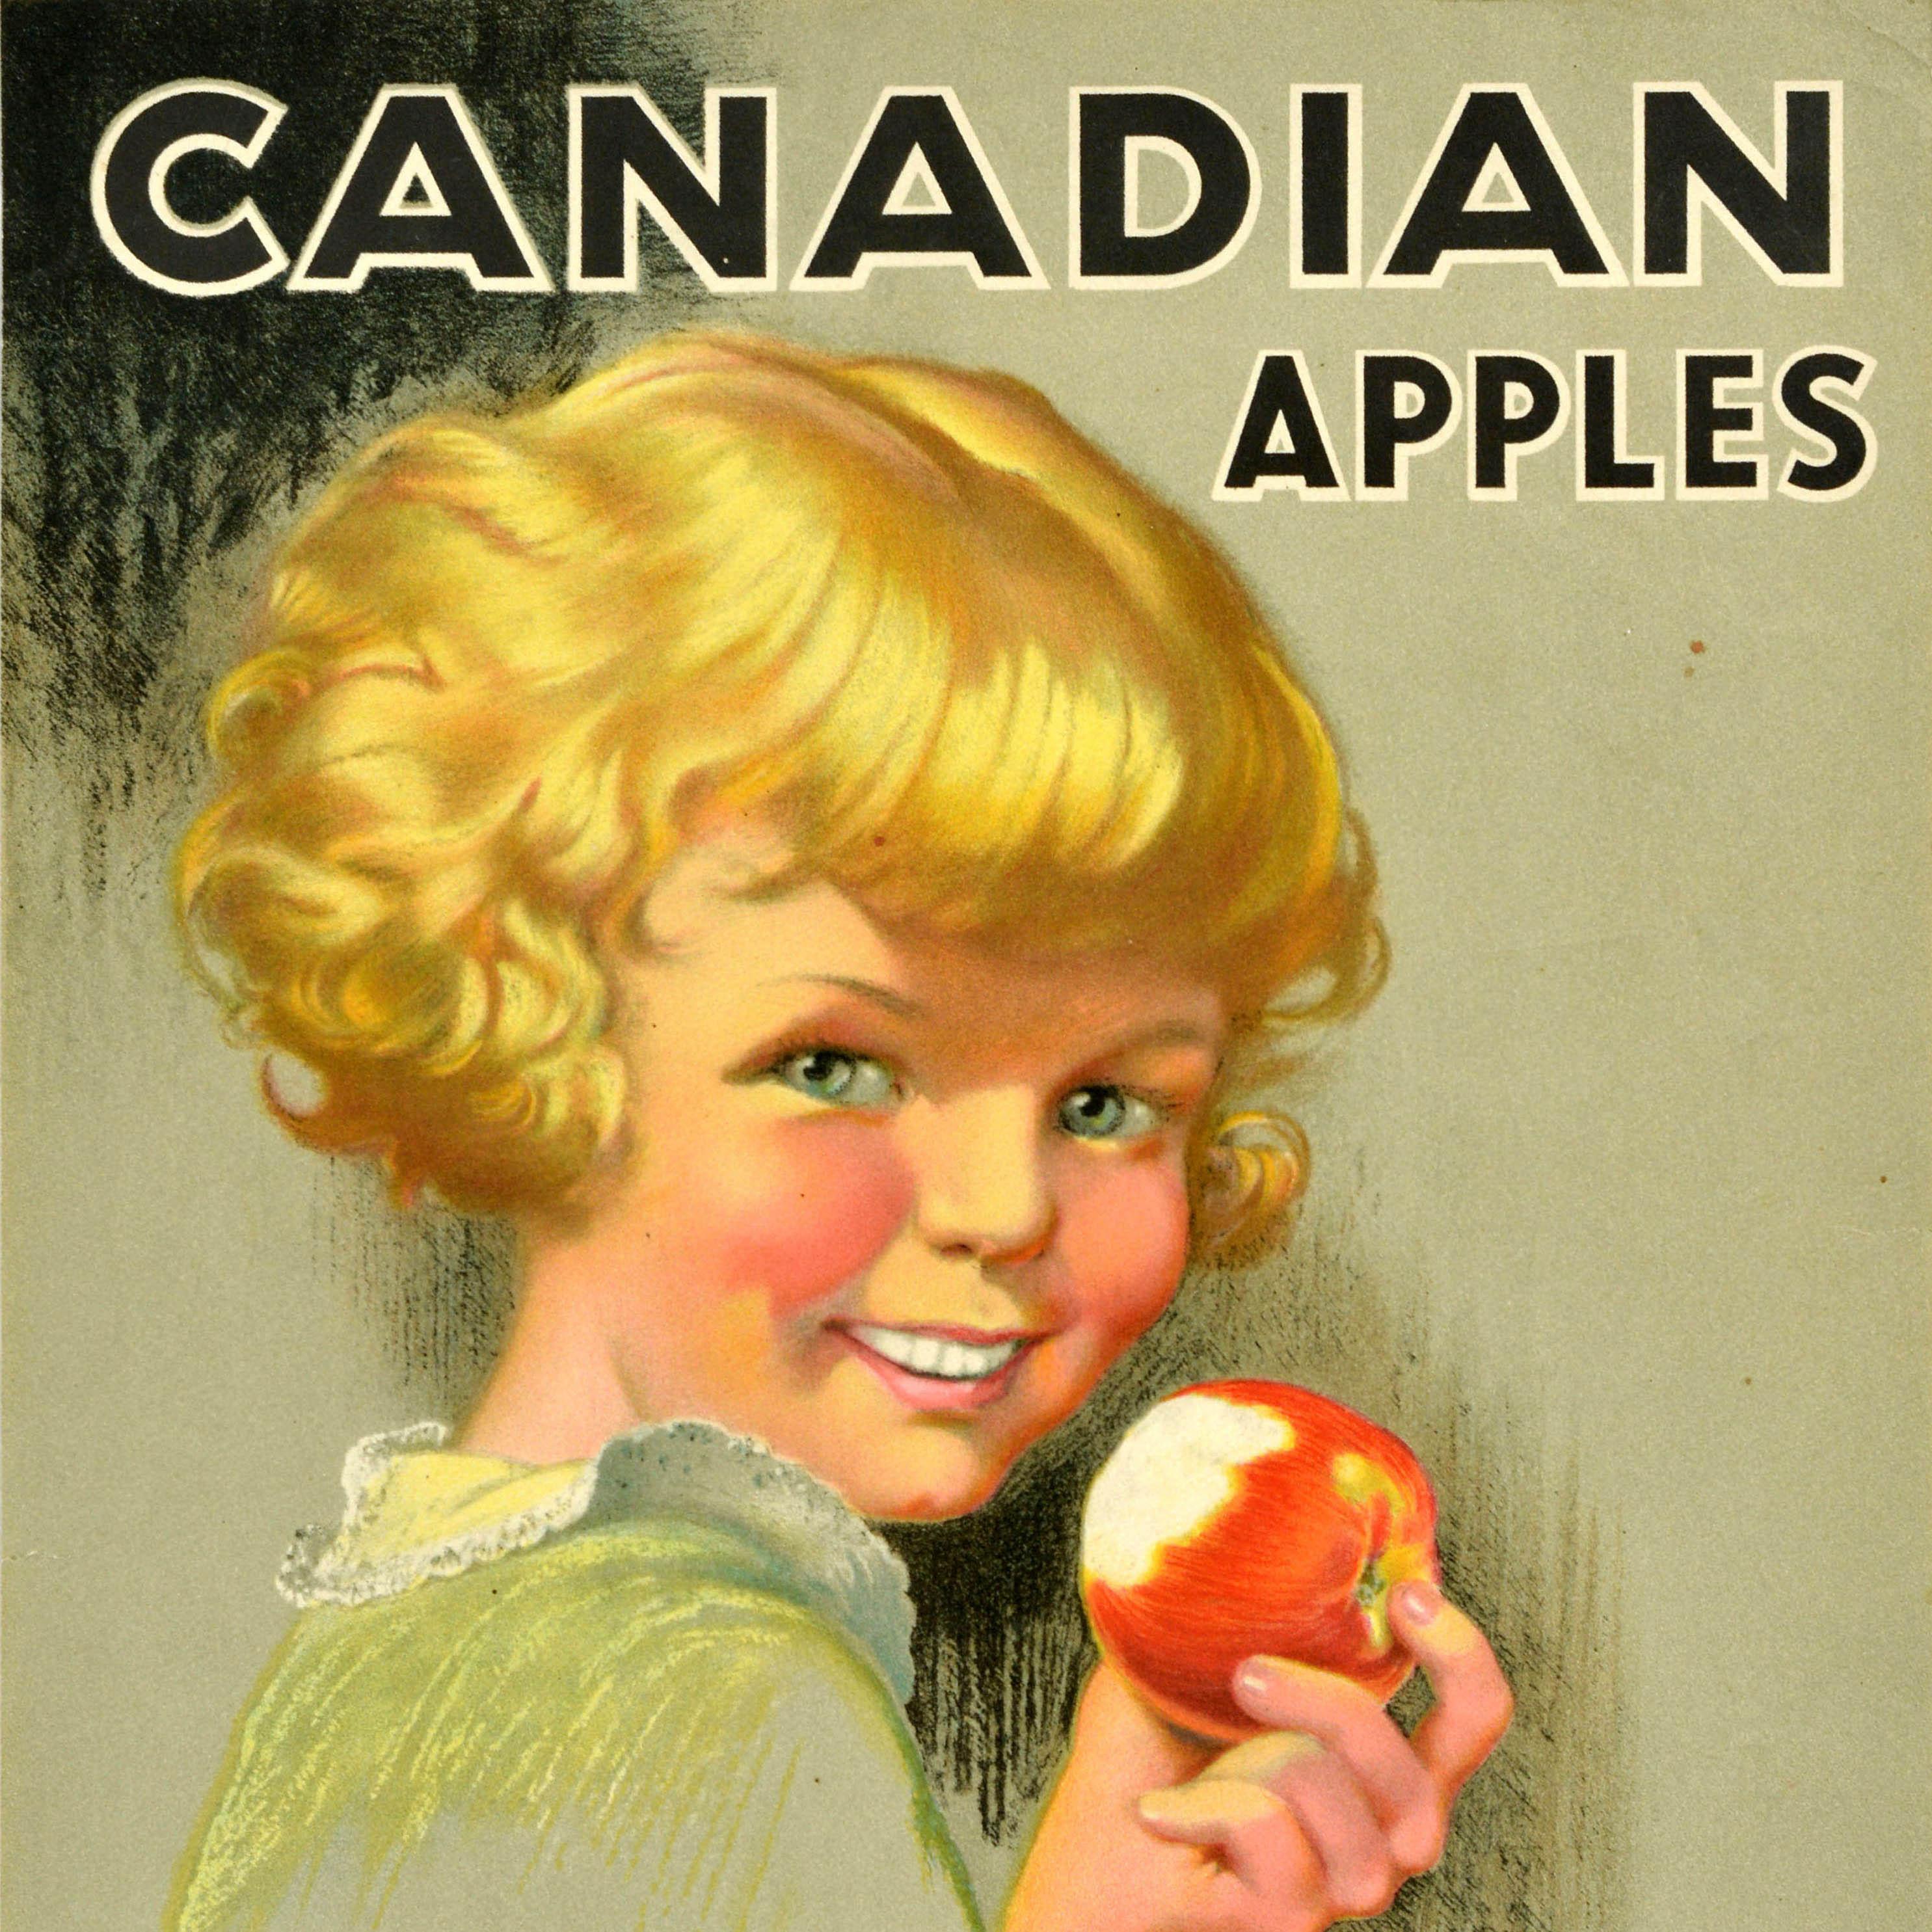 Original vintage fruit food advertising poster - Canadian Apples for health and beauty - featuring an illustration of a young blonde haired girl holding a red apple and smiling to the viewer with the bold text above and below. Good condition,